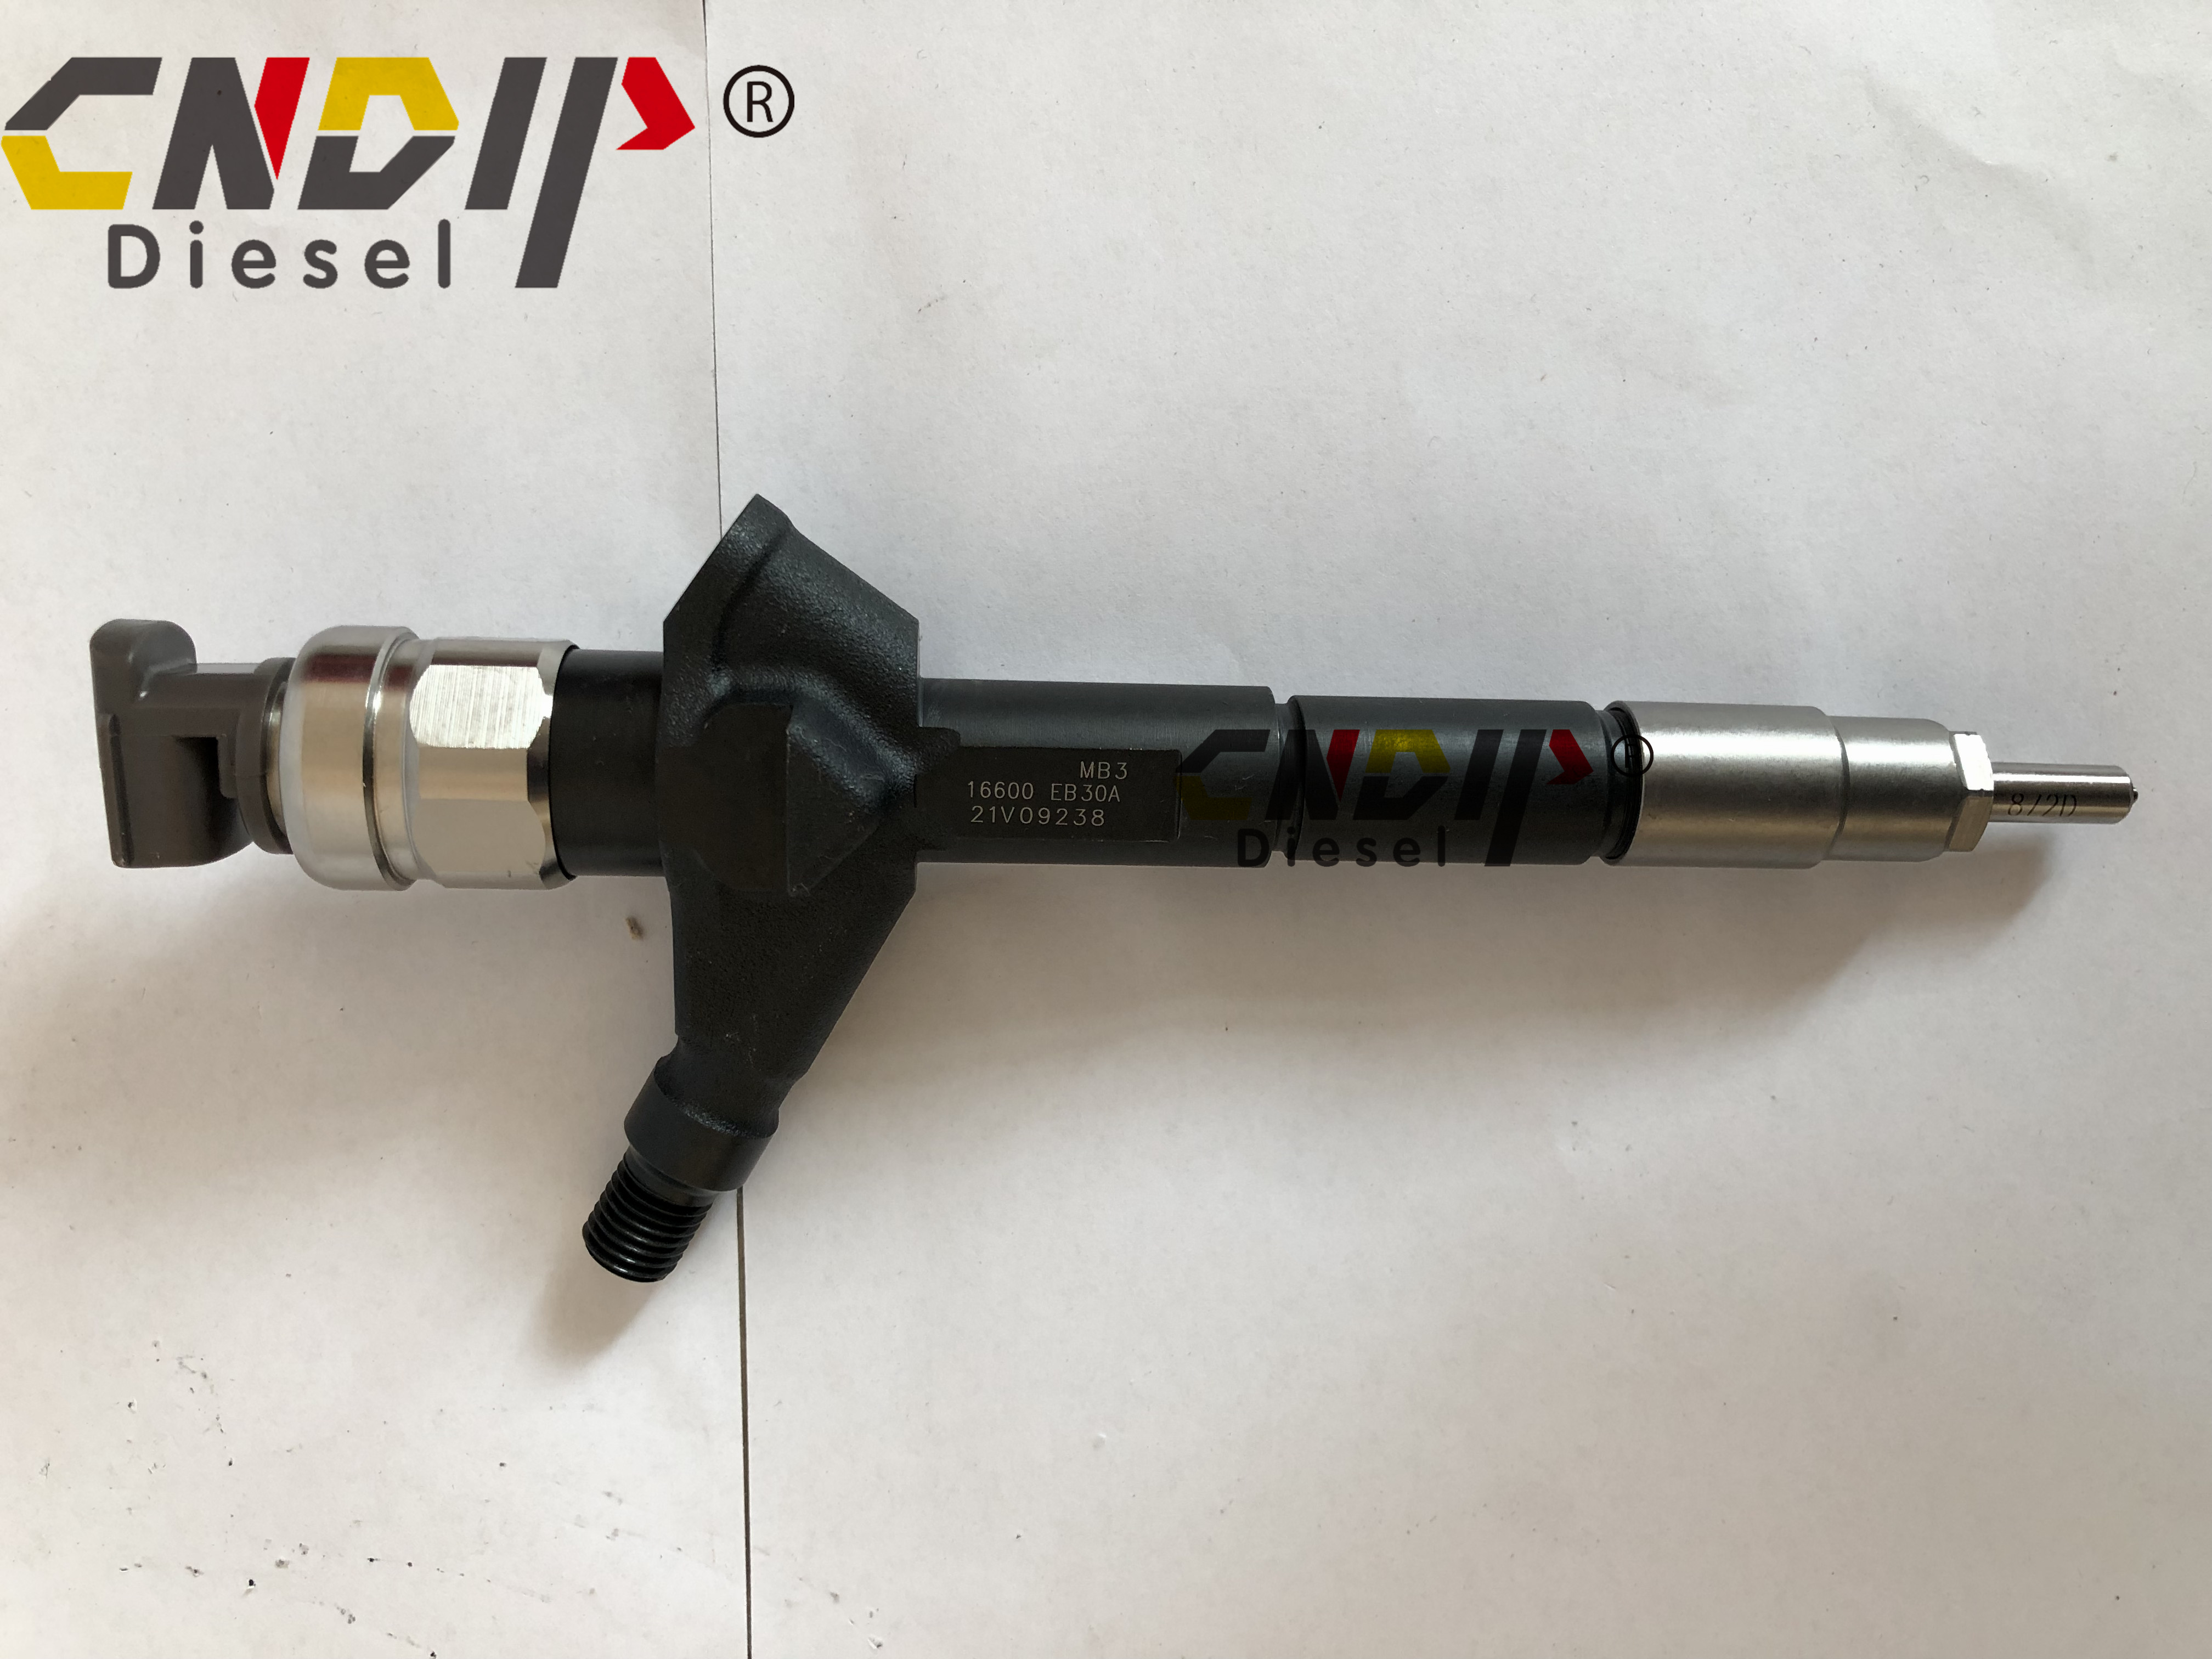  Common Rail Injector (CR) for Nissan YD25 16600-EB30A 